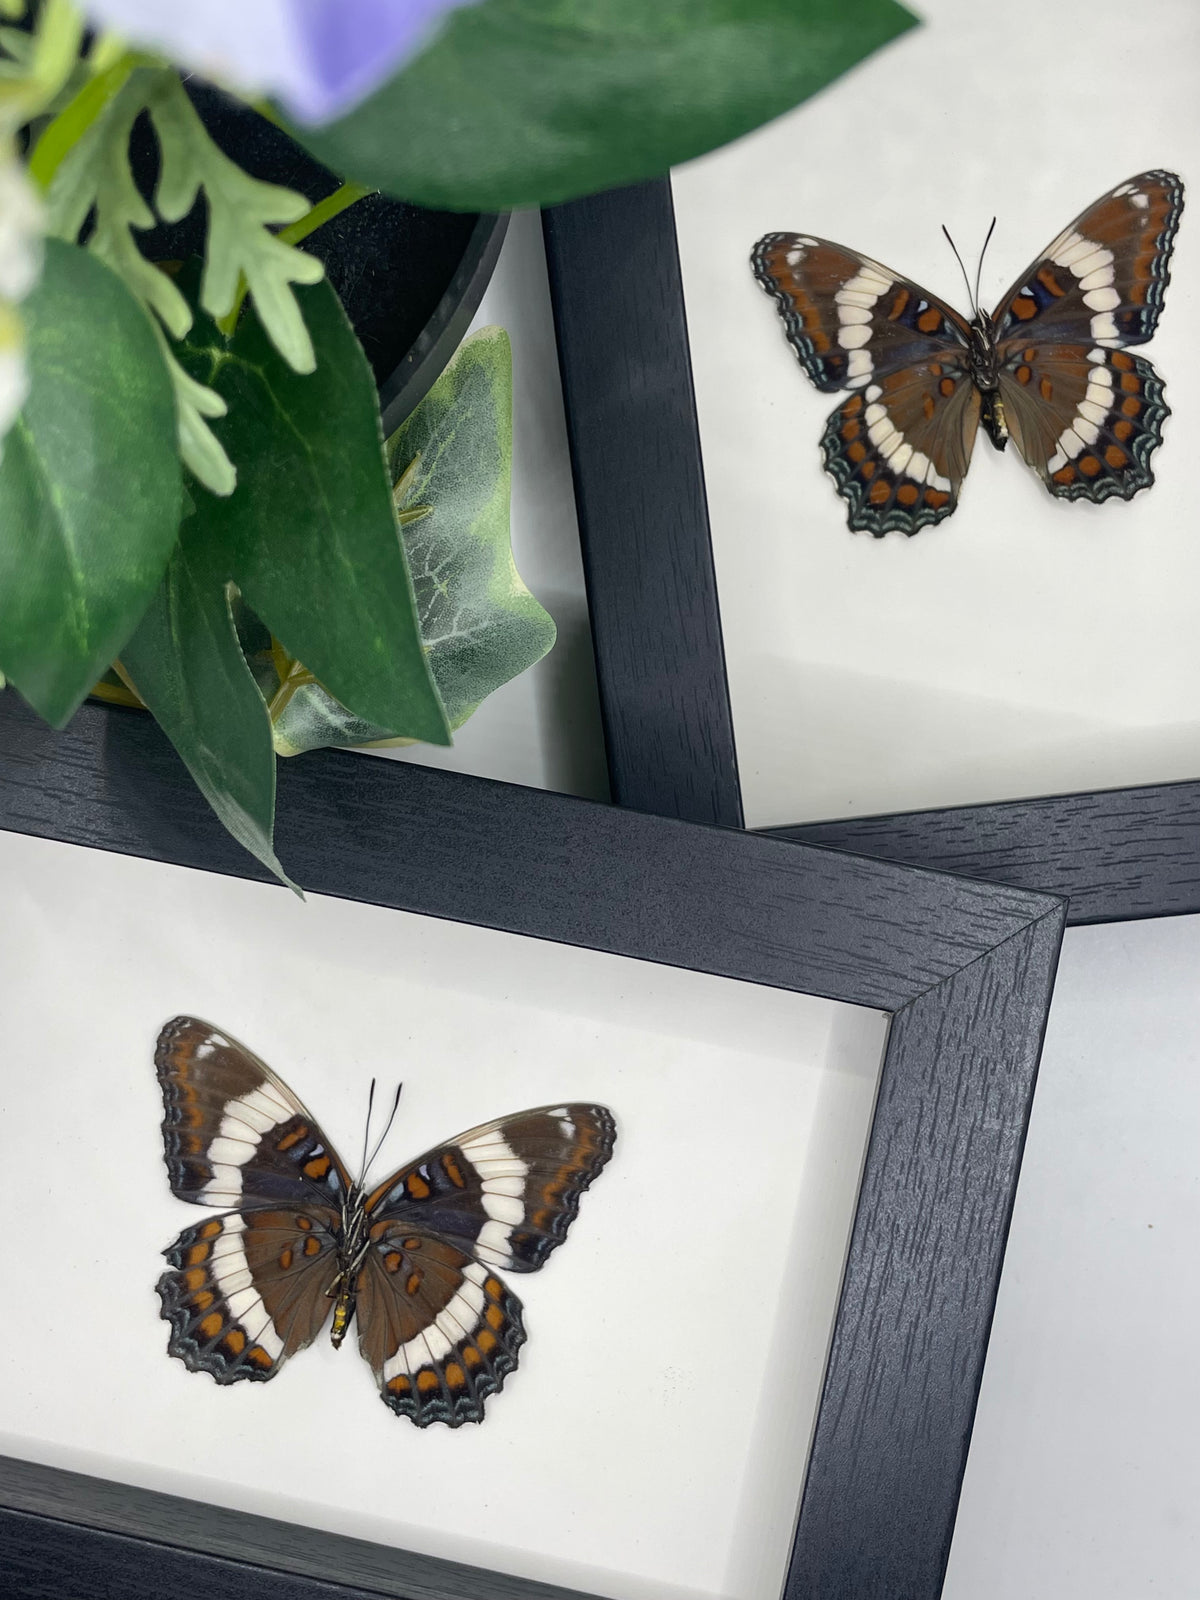 White Admiral Butterfly / Limenitis Arthemis in a frame